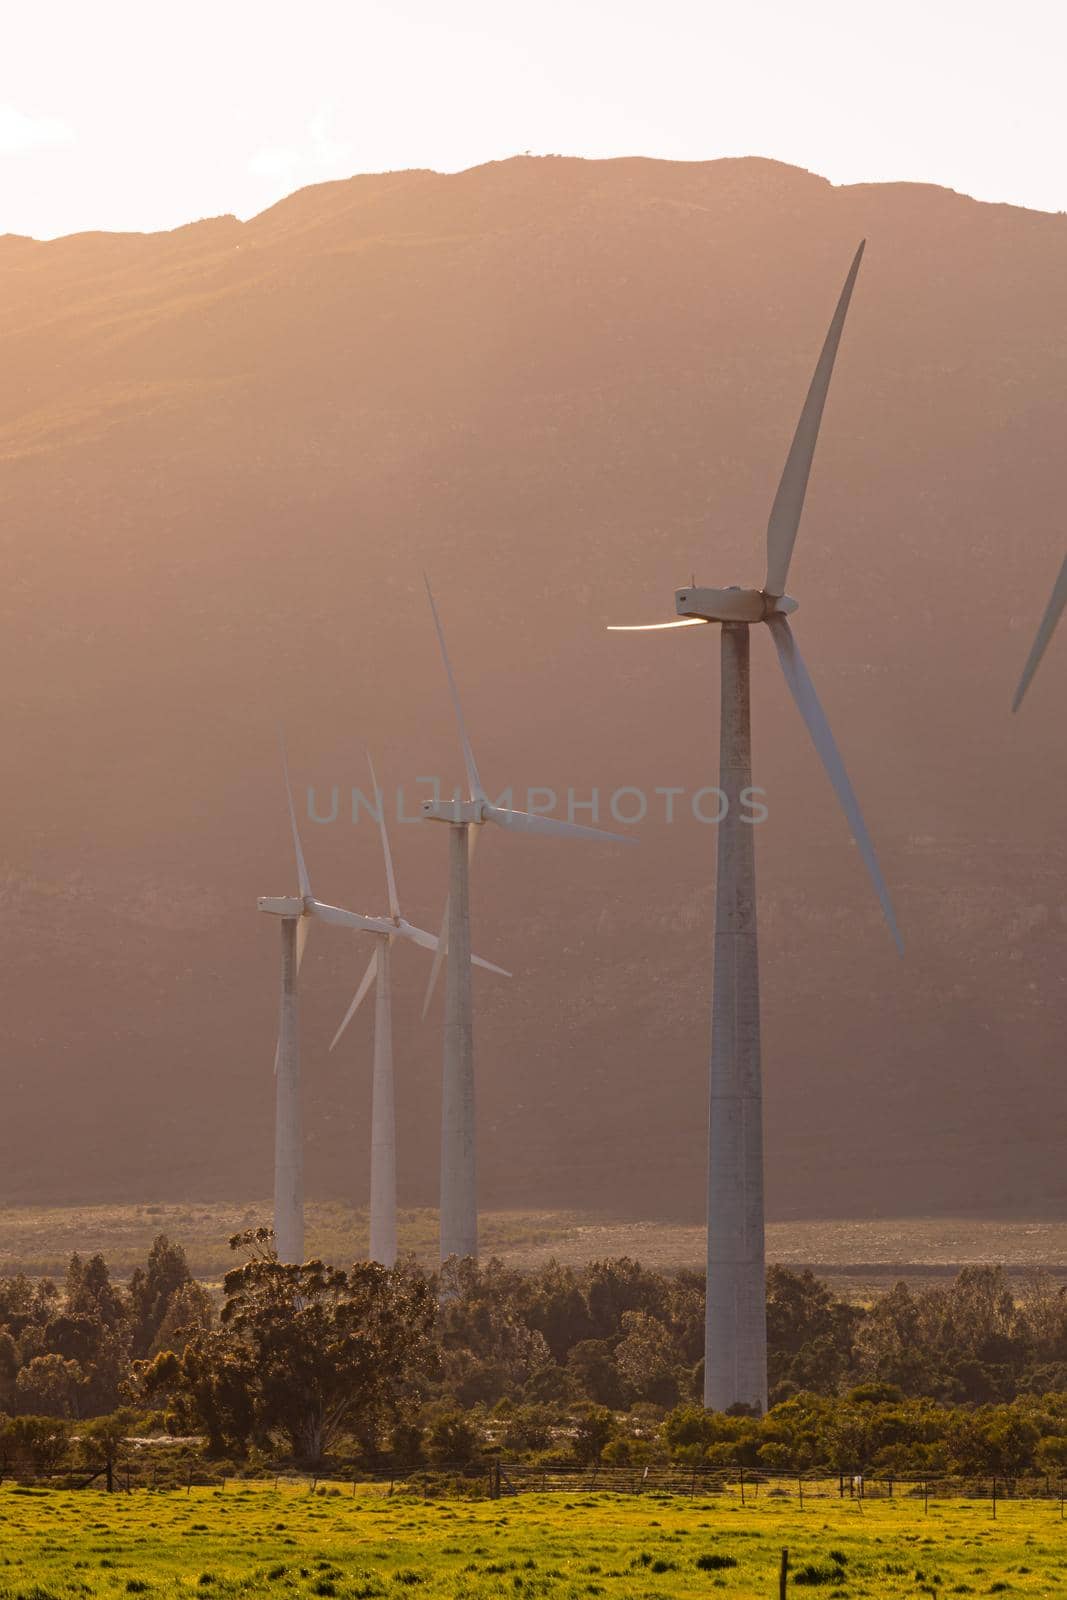 General view of wind turbines in countryside landscape with cloudless sky by Wavebreakmedia